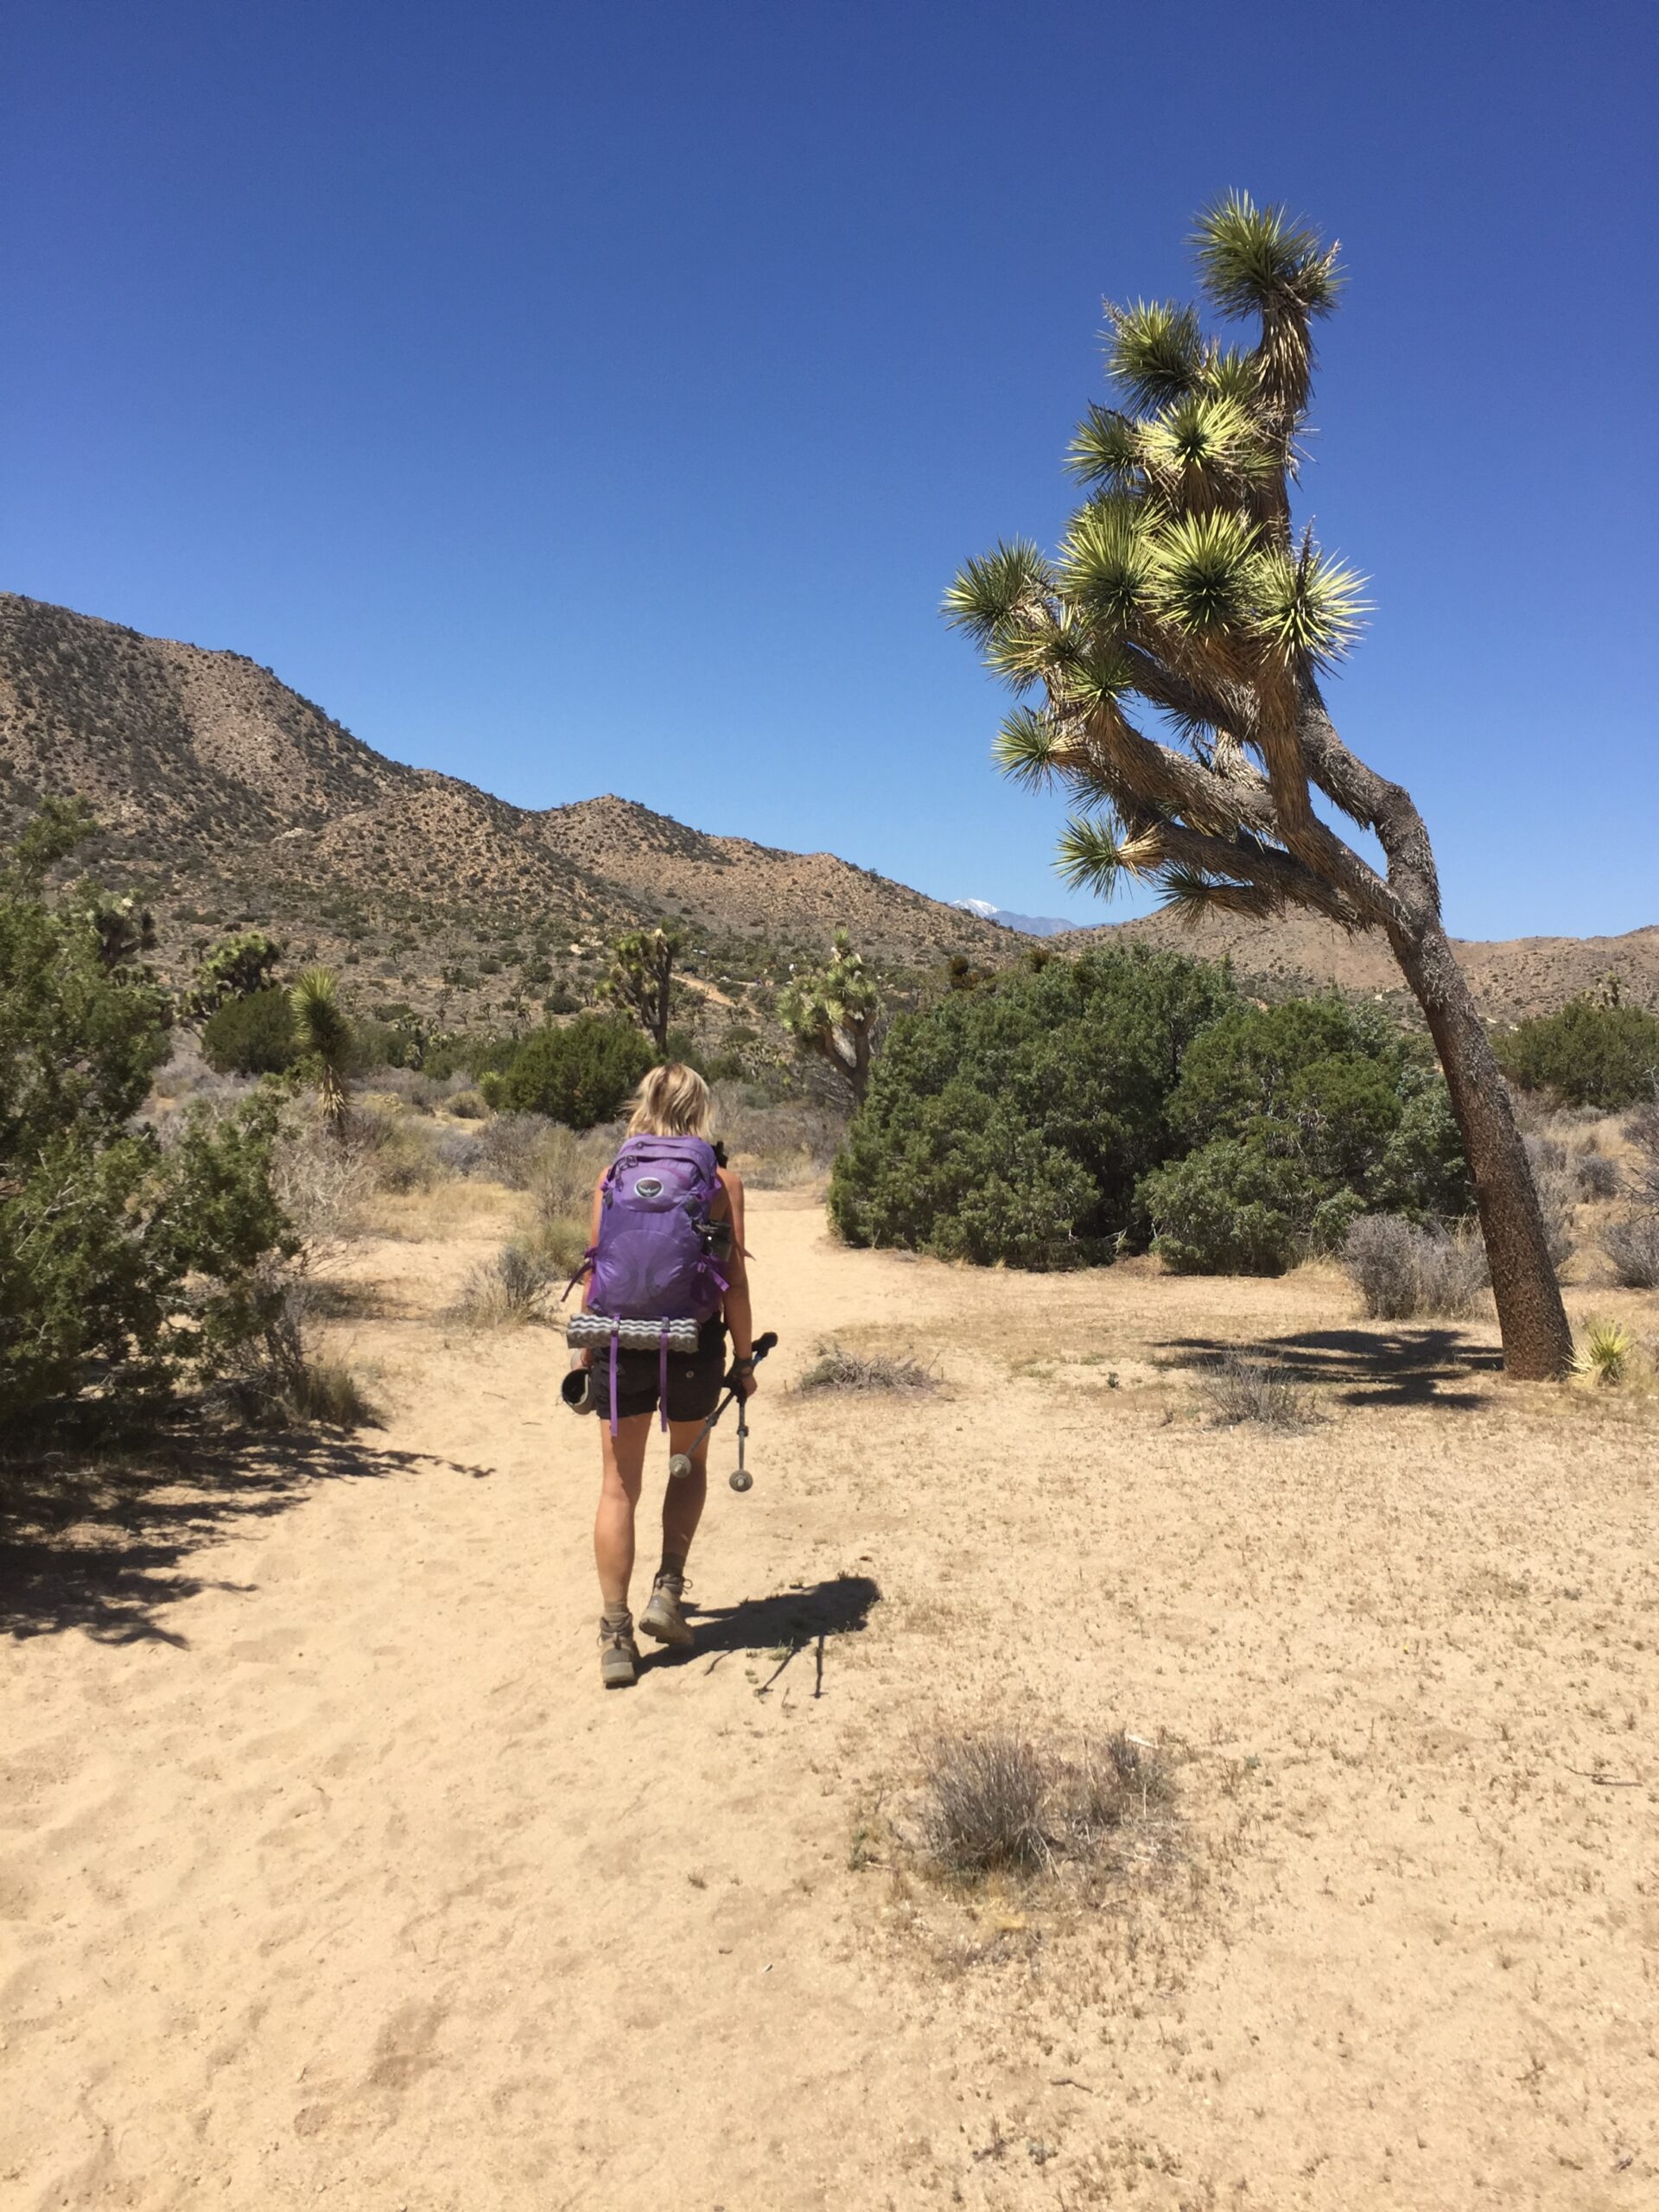 The heat is on climbing in Joshua Tree National Park